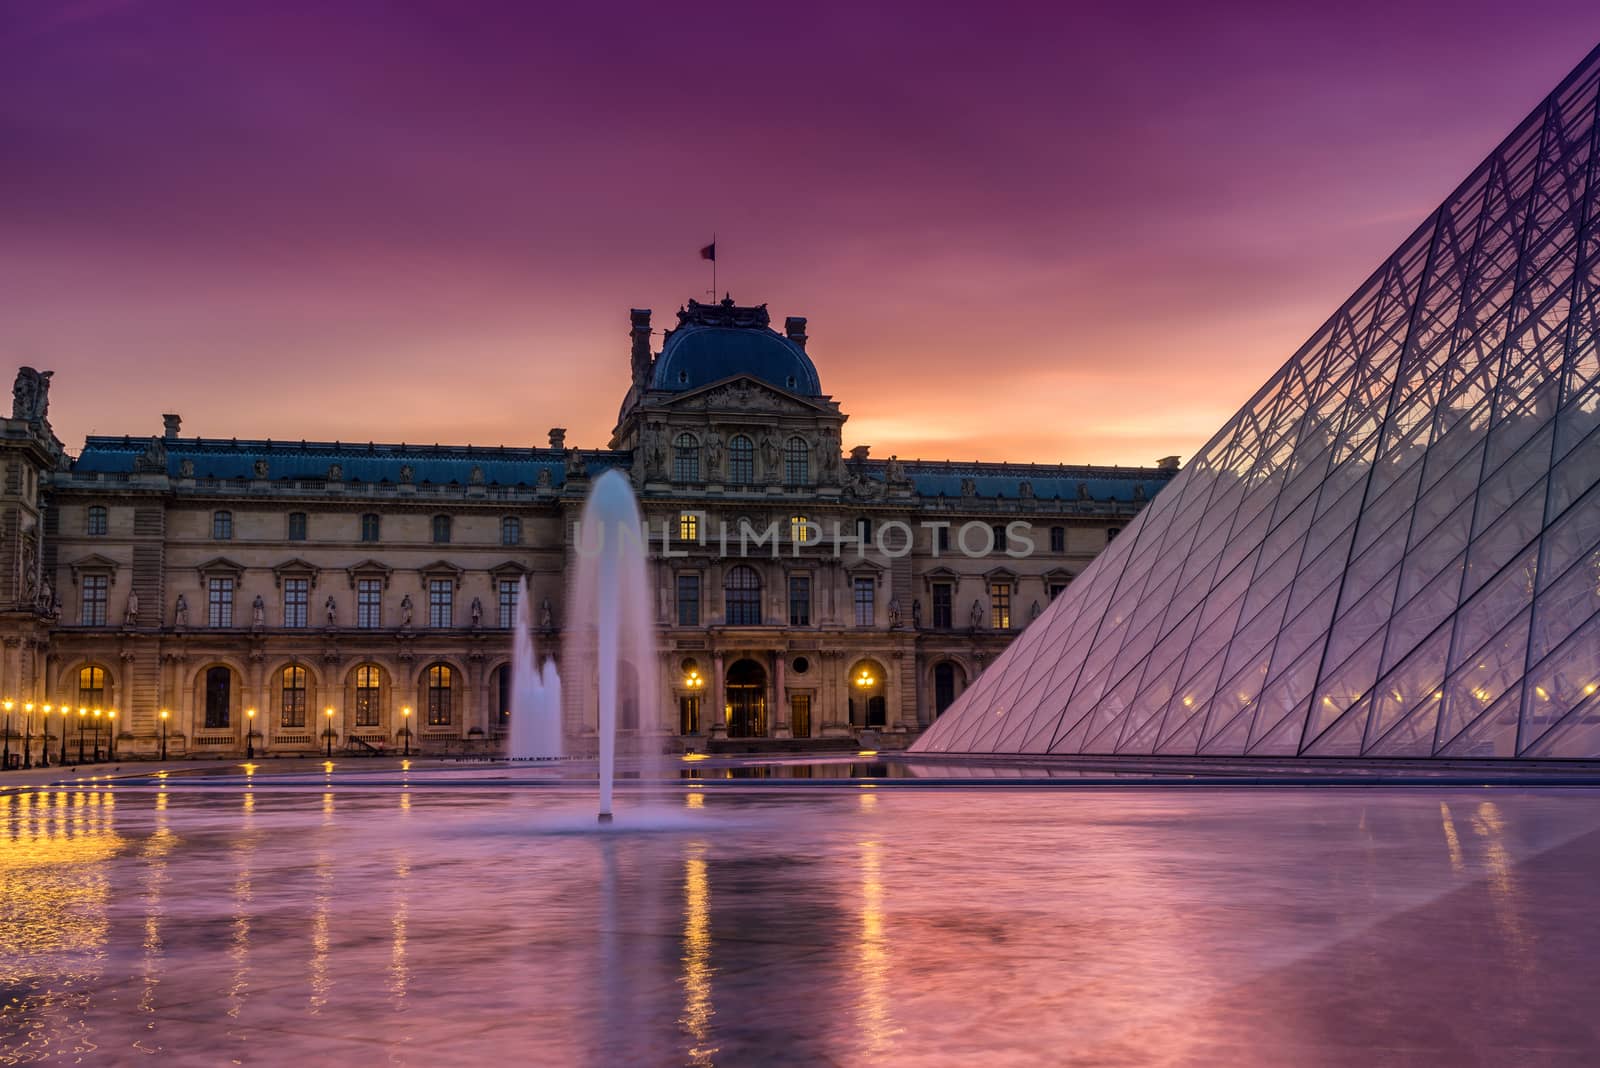 PARIS, FRANCE - DECEMBER 9, 2016: View of famous Louvre Museum with Louvre Pyramid at evening. Louvre Museum is one of the largest and most visited museums worldwide.